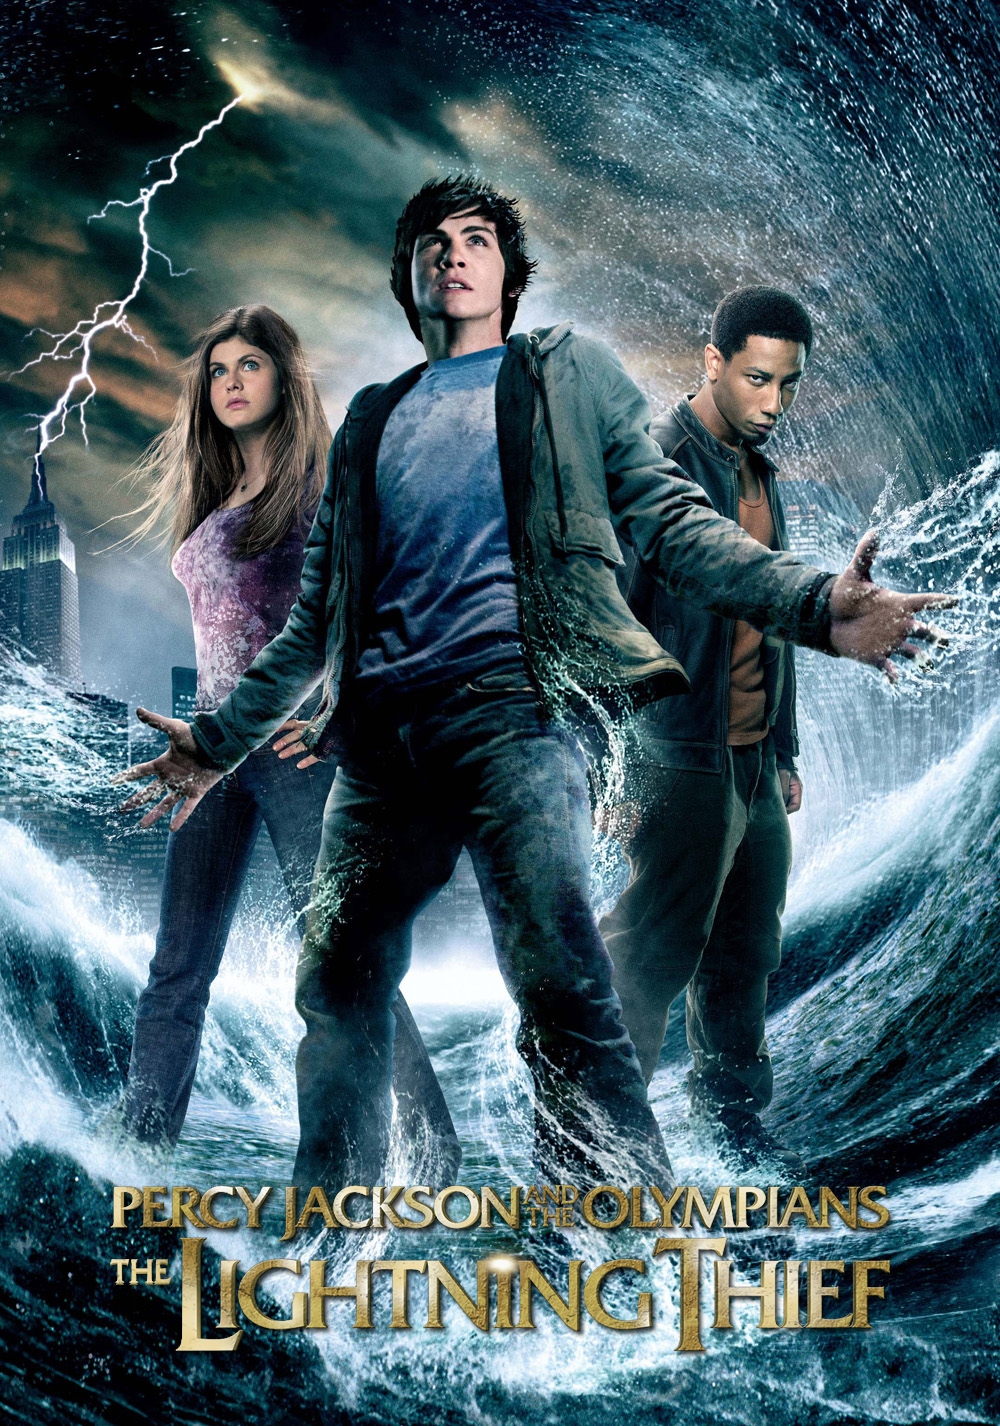 Percy Jackson & the Olympians: The Lightning Thief Picture